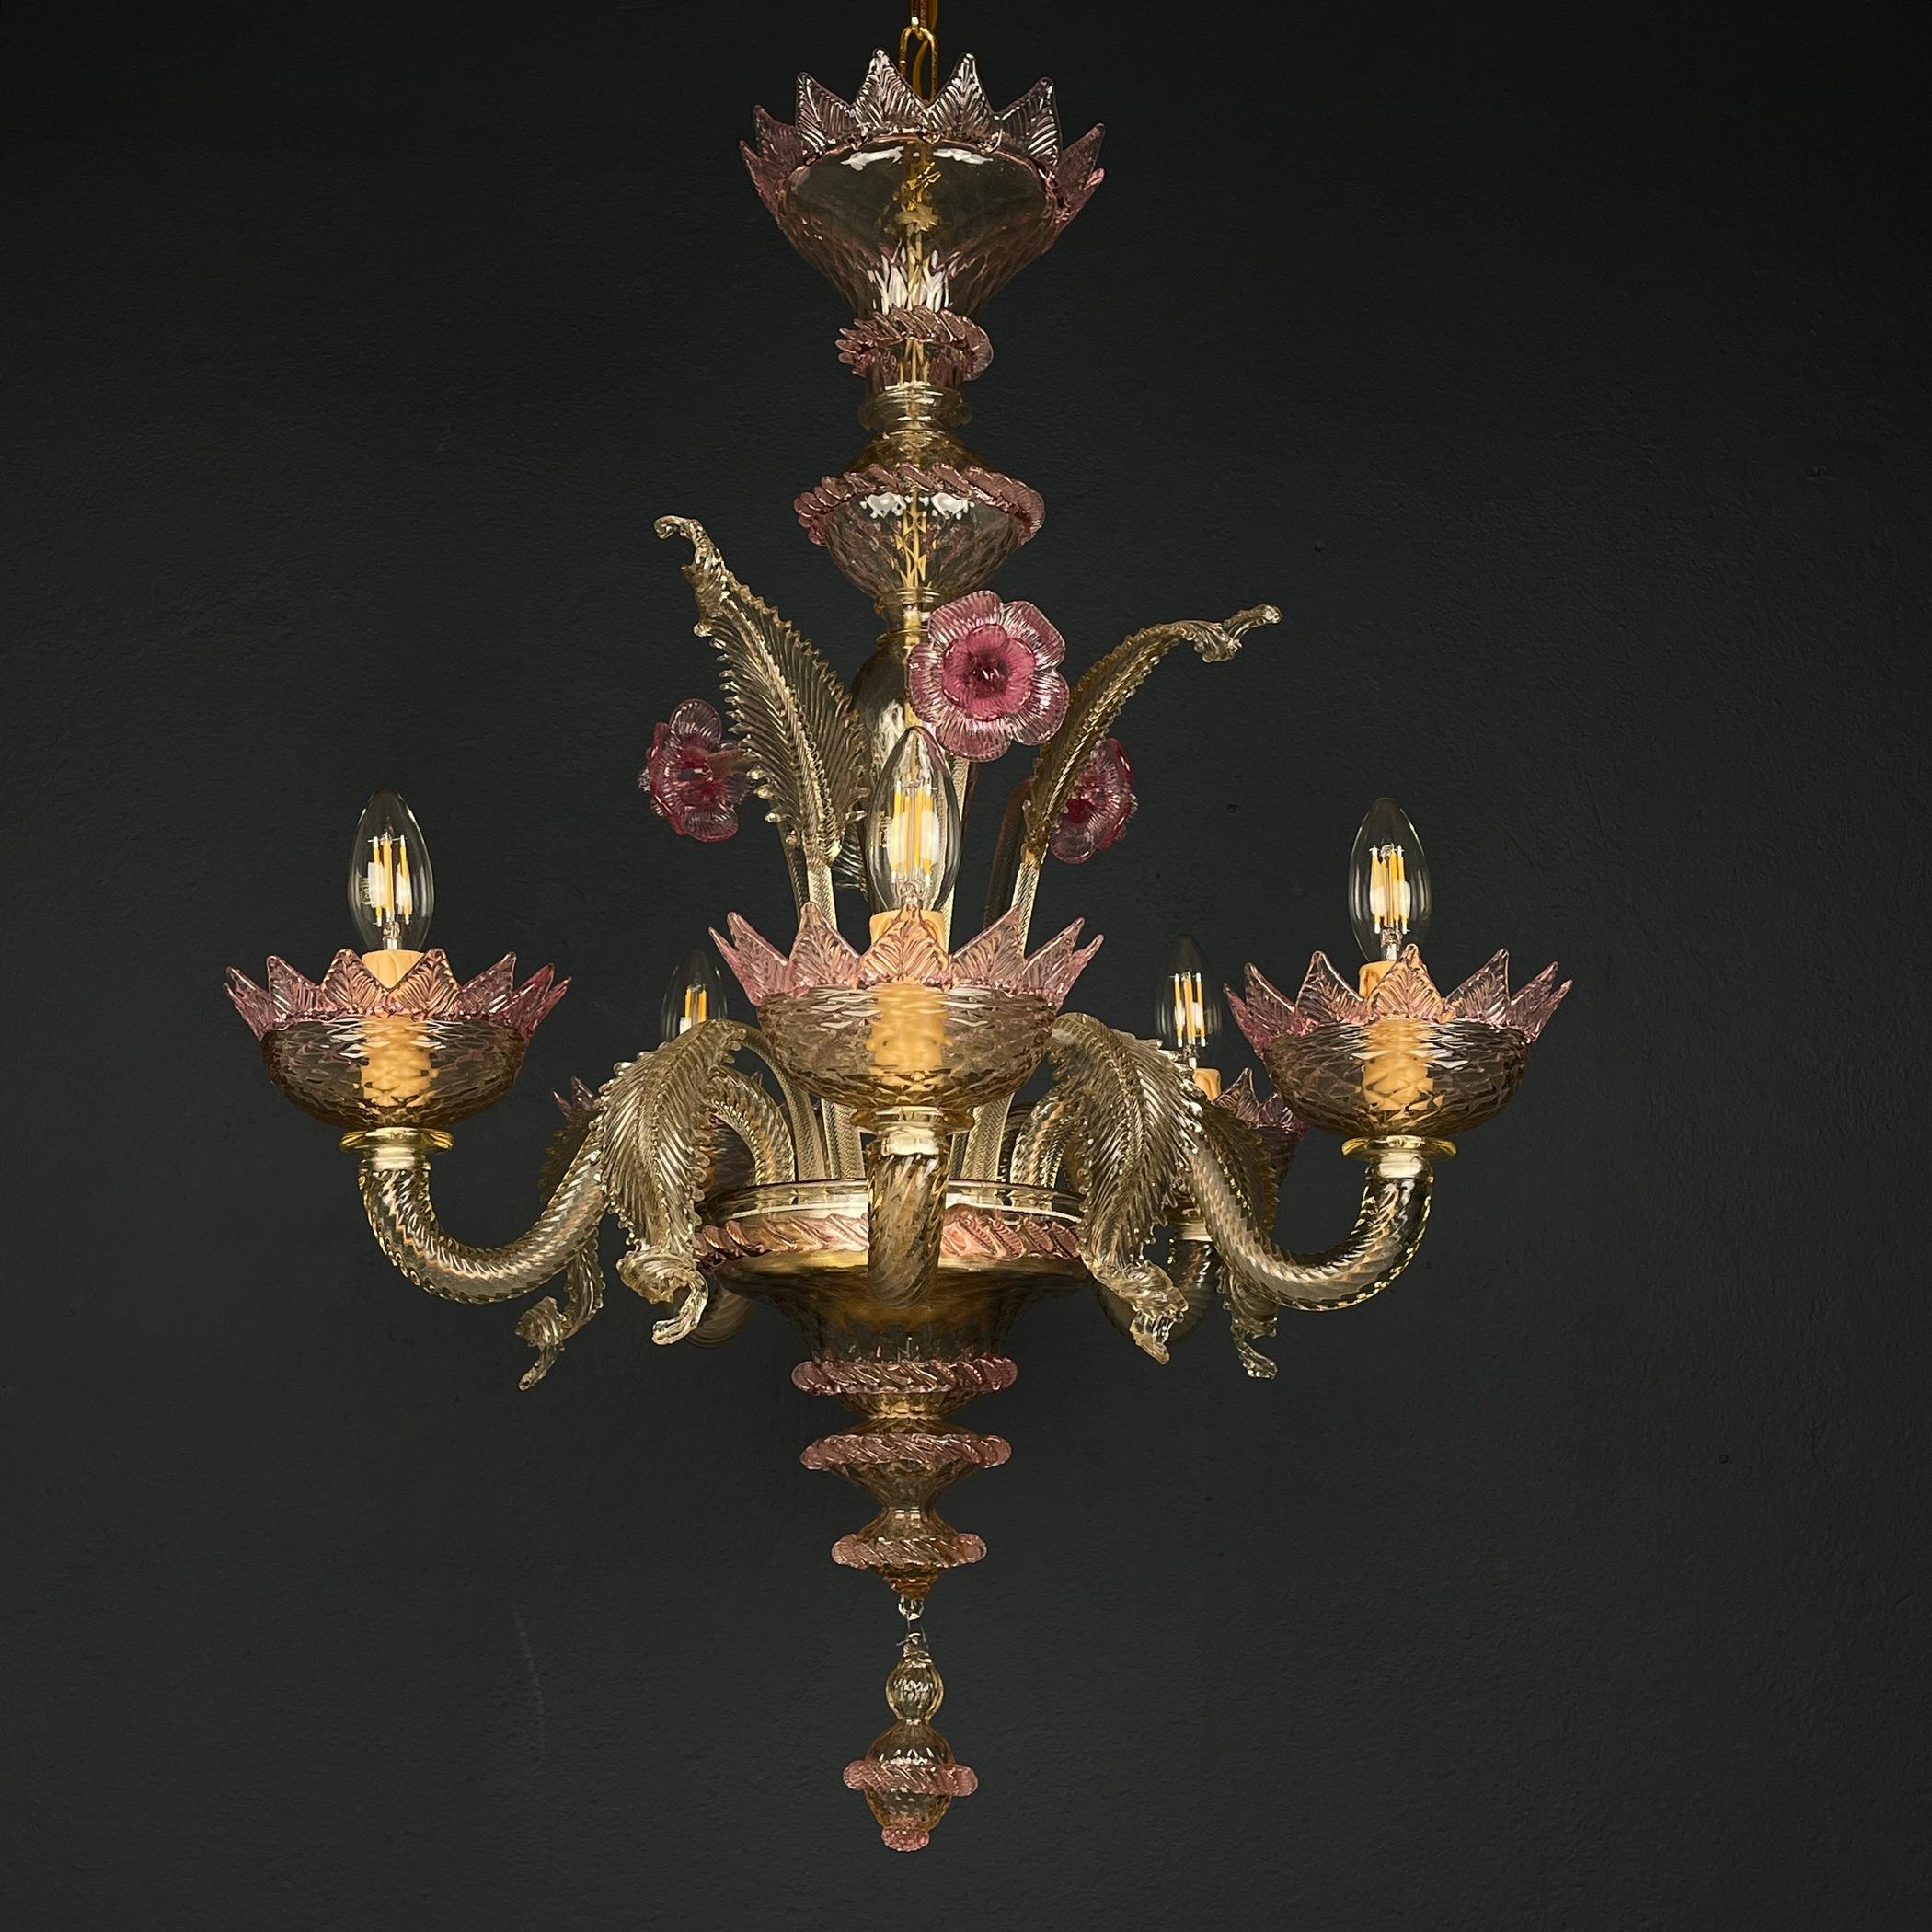 This elegant Murano flower chandelier is a beautiful Italian home decor piece from the 1980s. It features a lovely combination of pink and clear glass, creating a delicate and charming aesthetic. Murano glass is renowned for its craftsmanship and